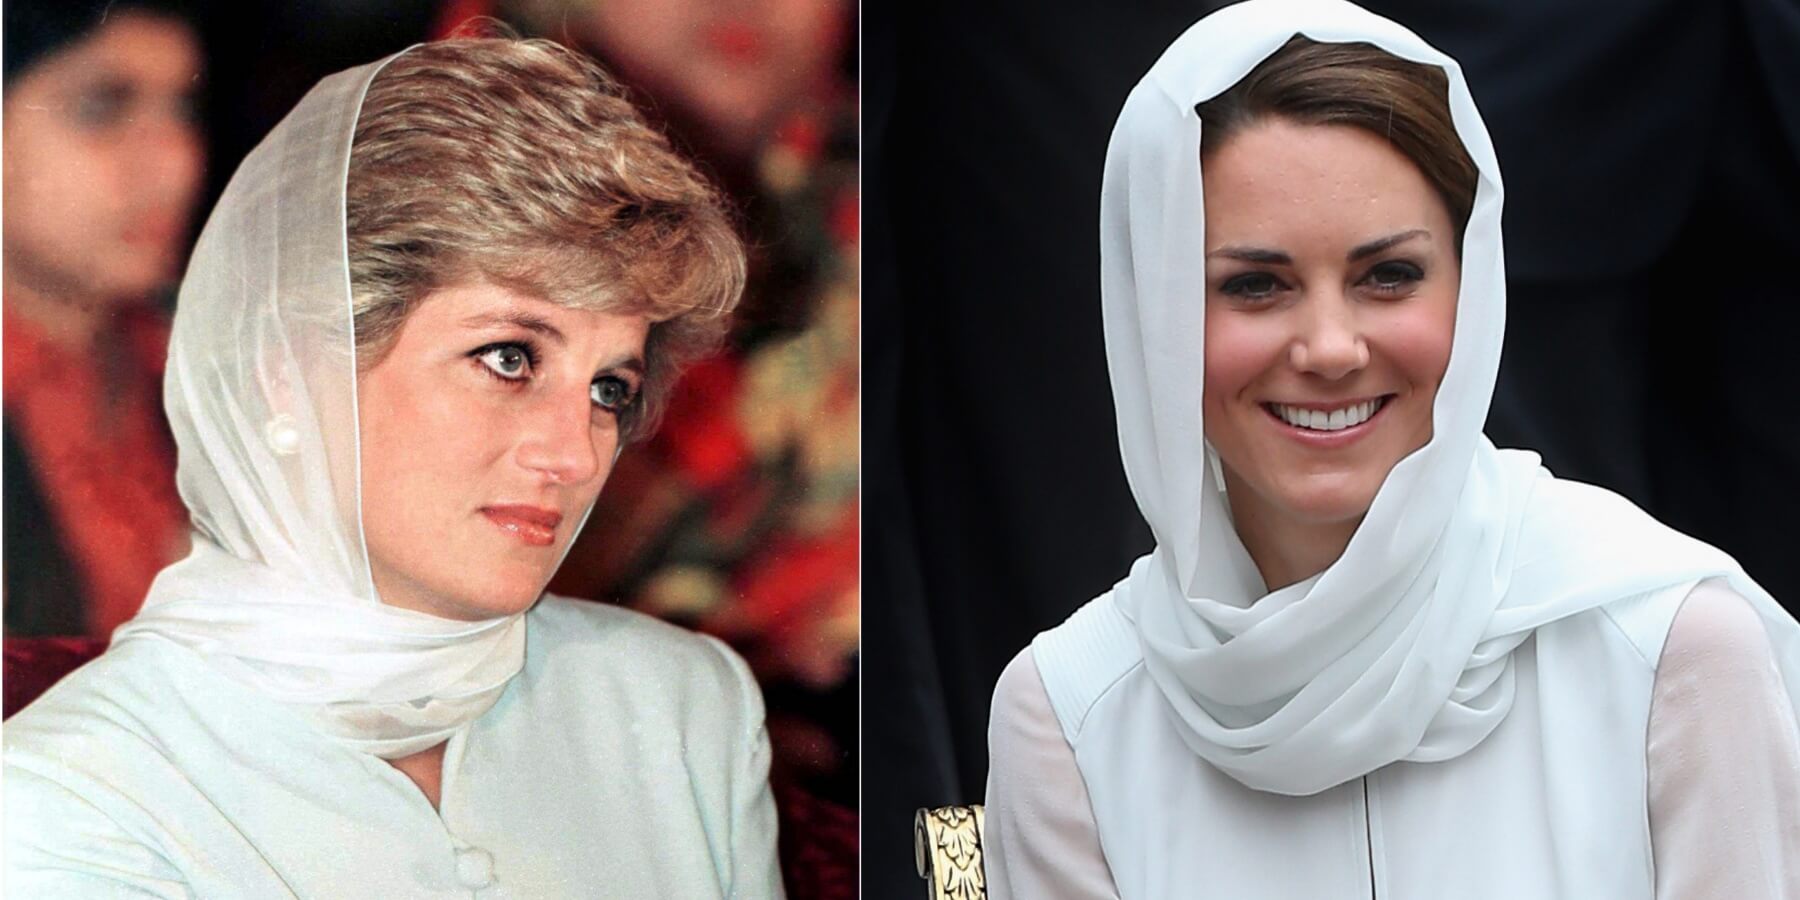 Princess Diana and Kate Middleton are drawing striking similarities in royal watchers for how they handled their private struggles.